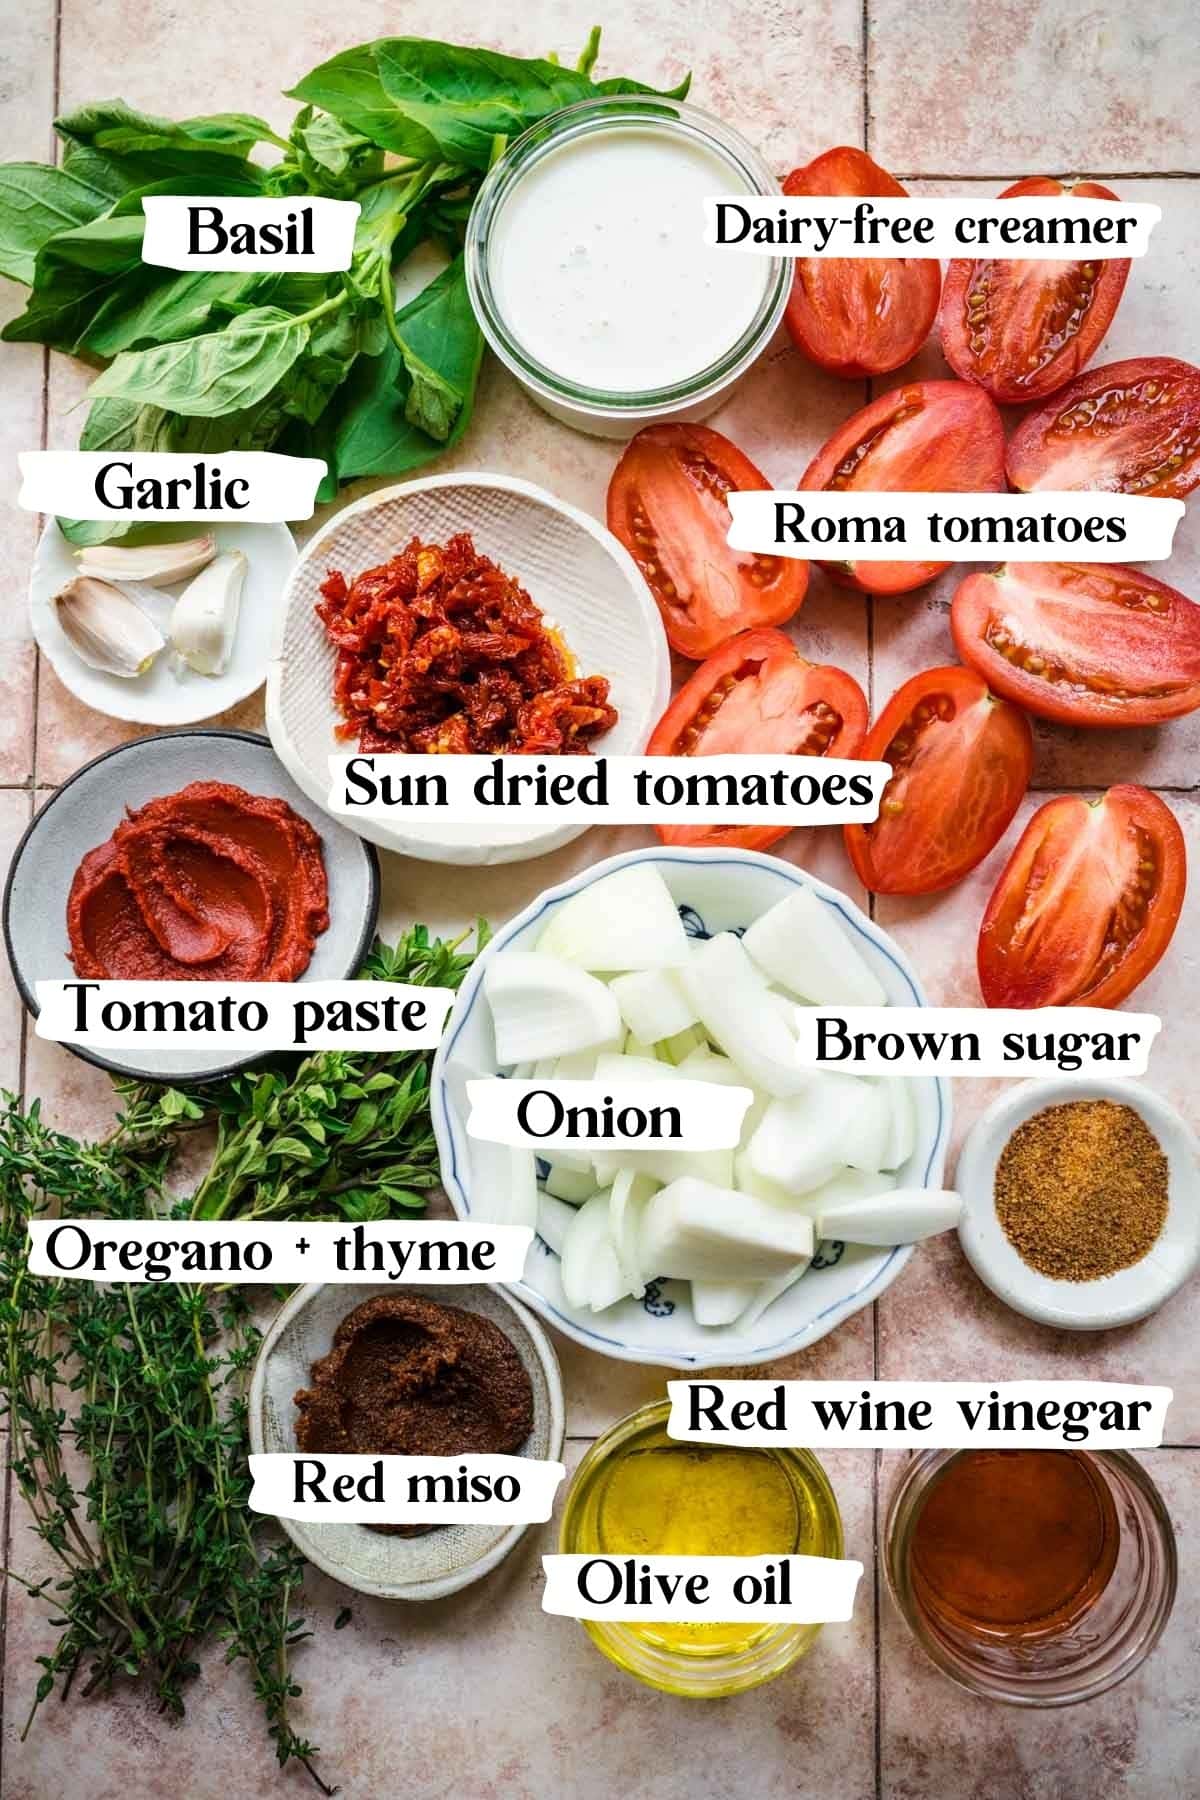 Shot of all the ingredients needed to make this dish, including tomatoes, onion, etc.